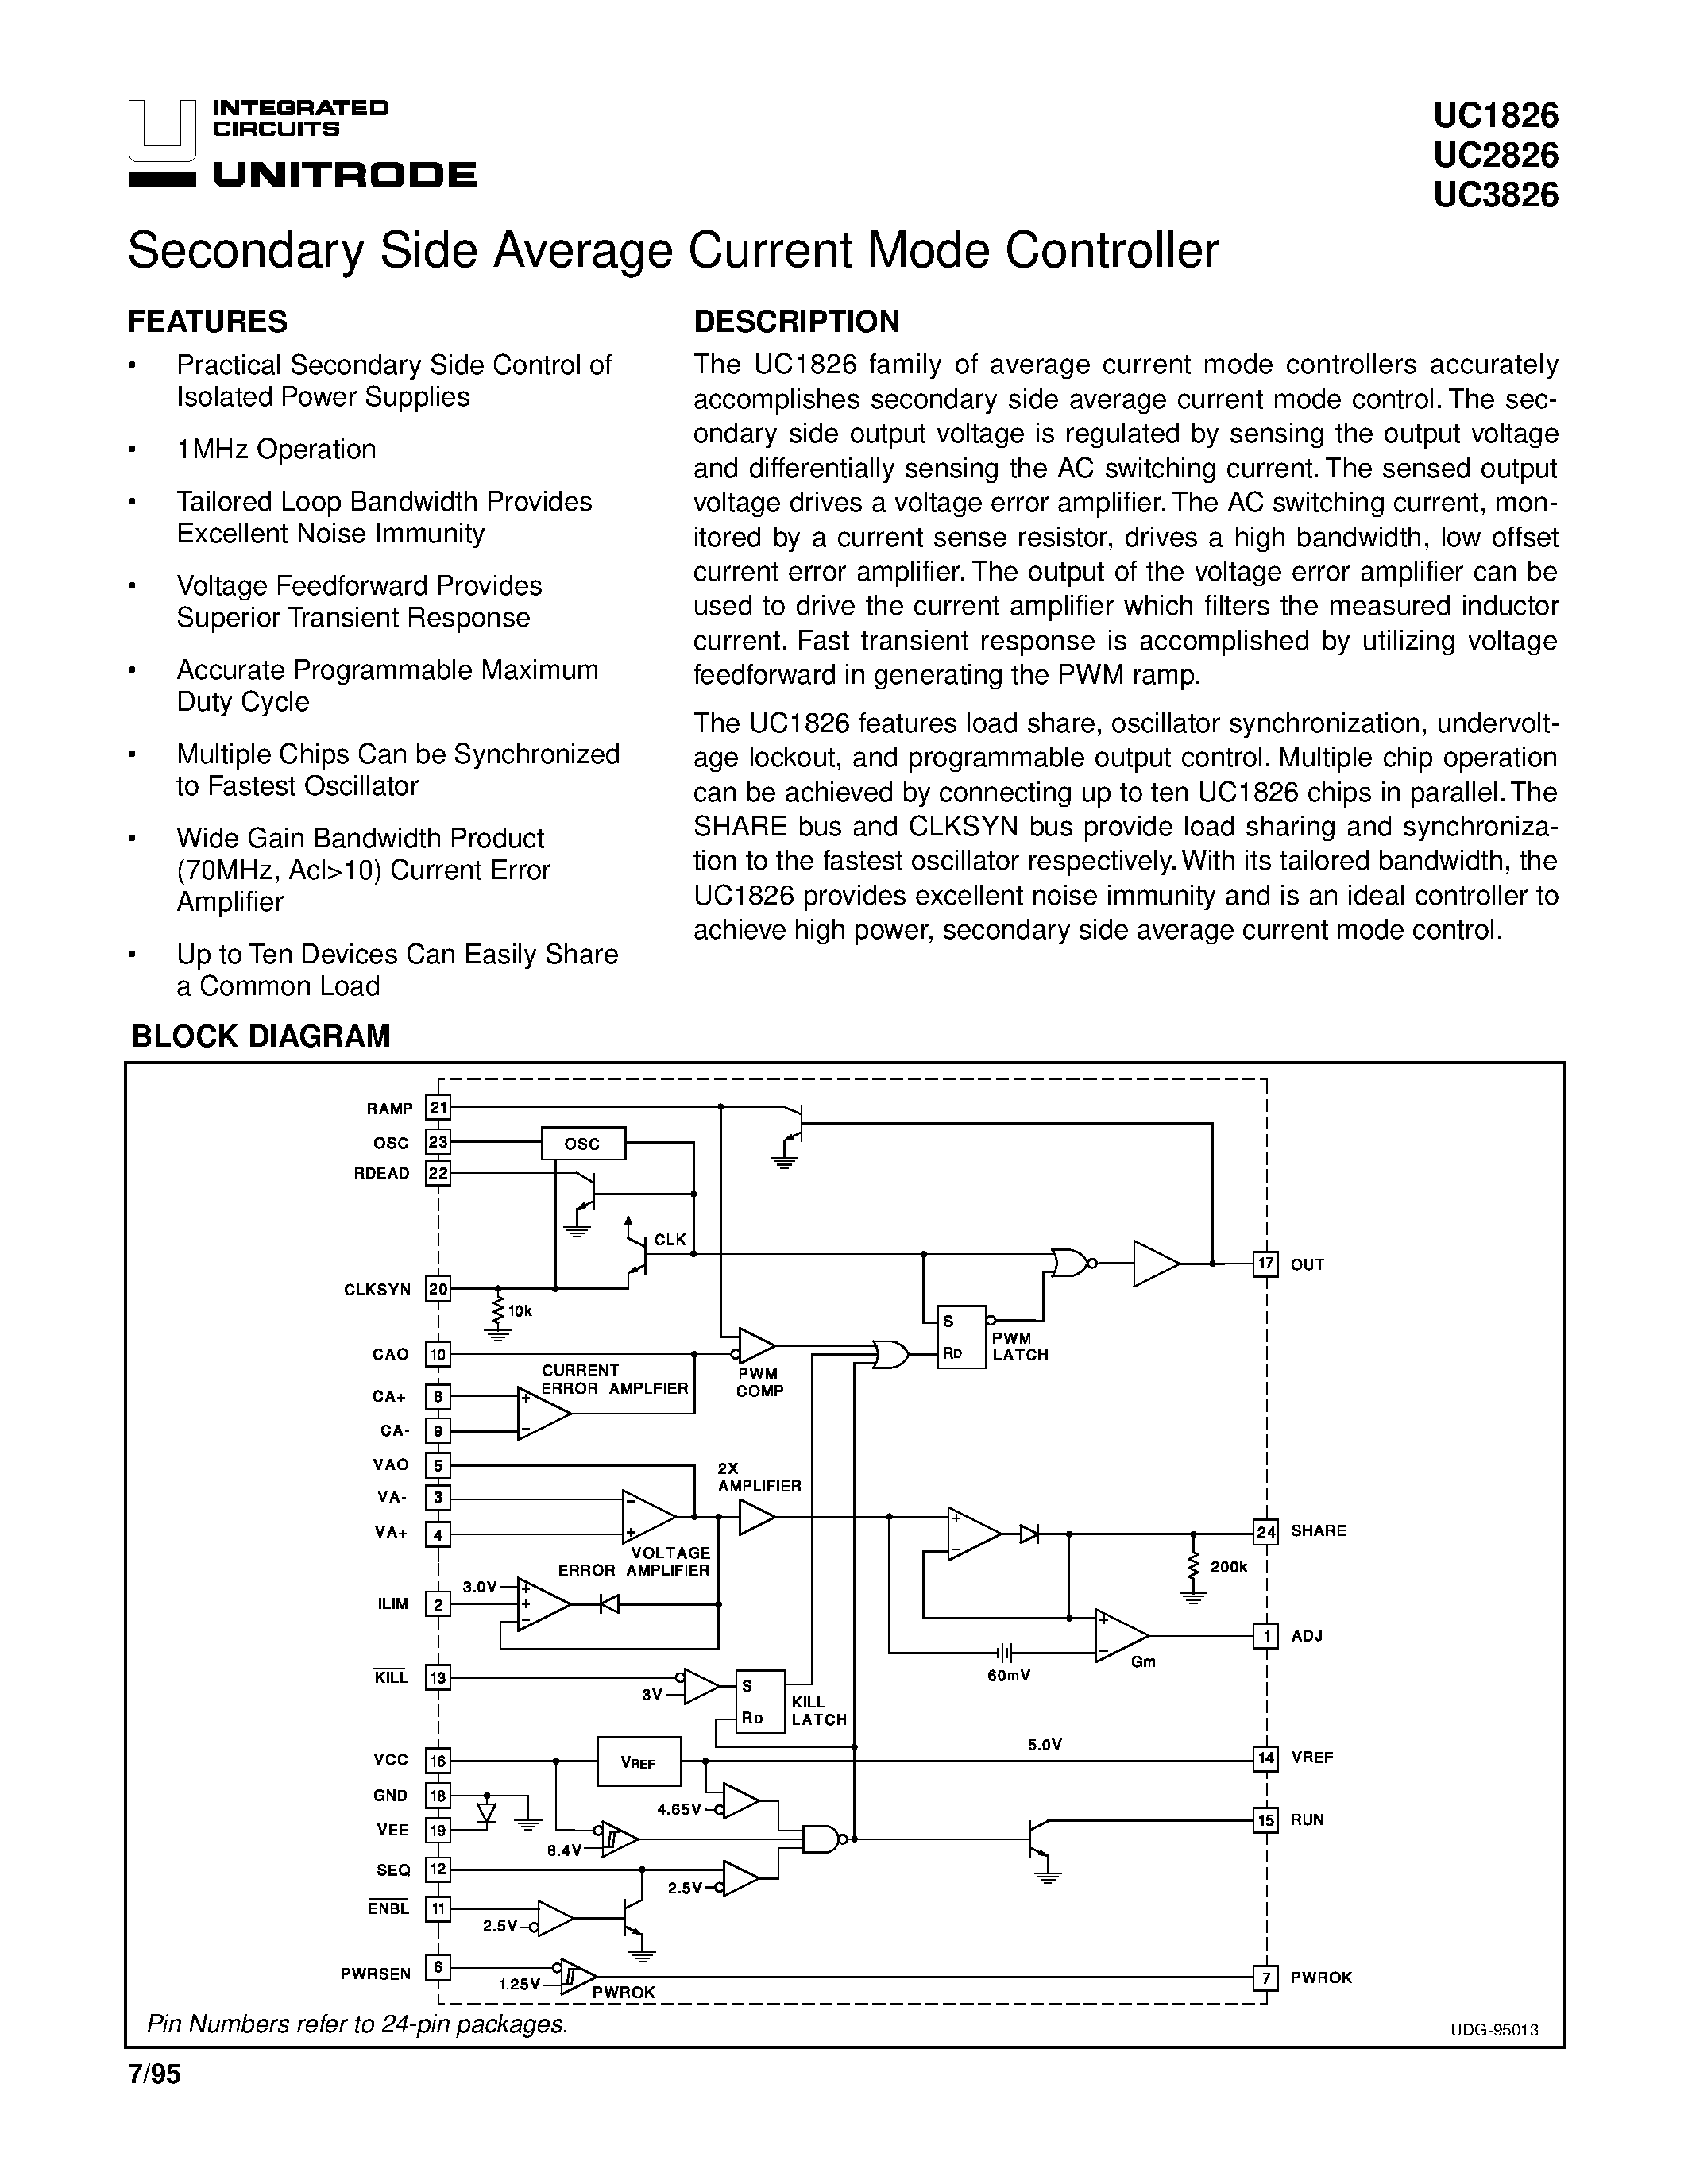 Datasheet UC2826 - Secondary Side Average Current Mode Controller page 1